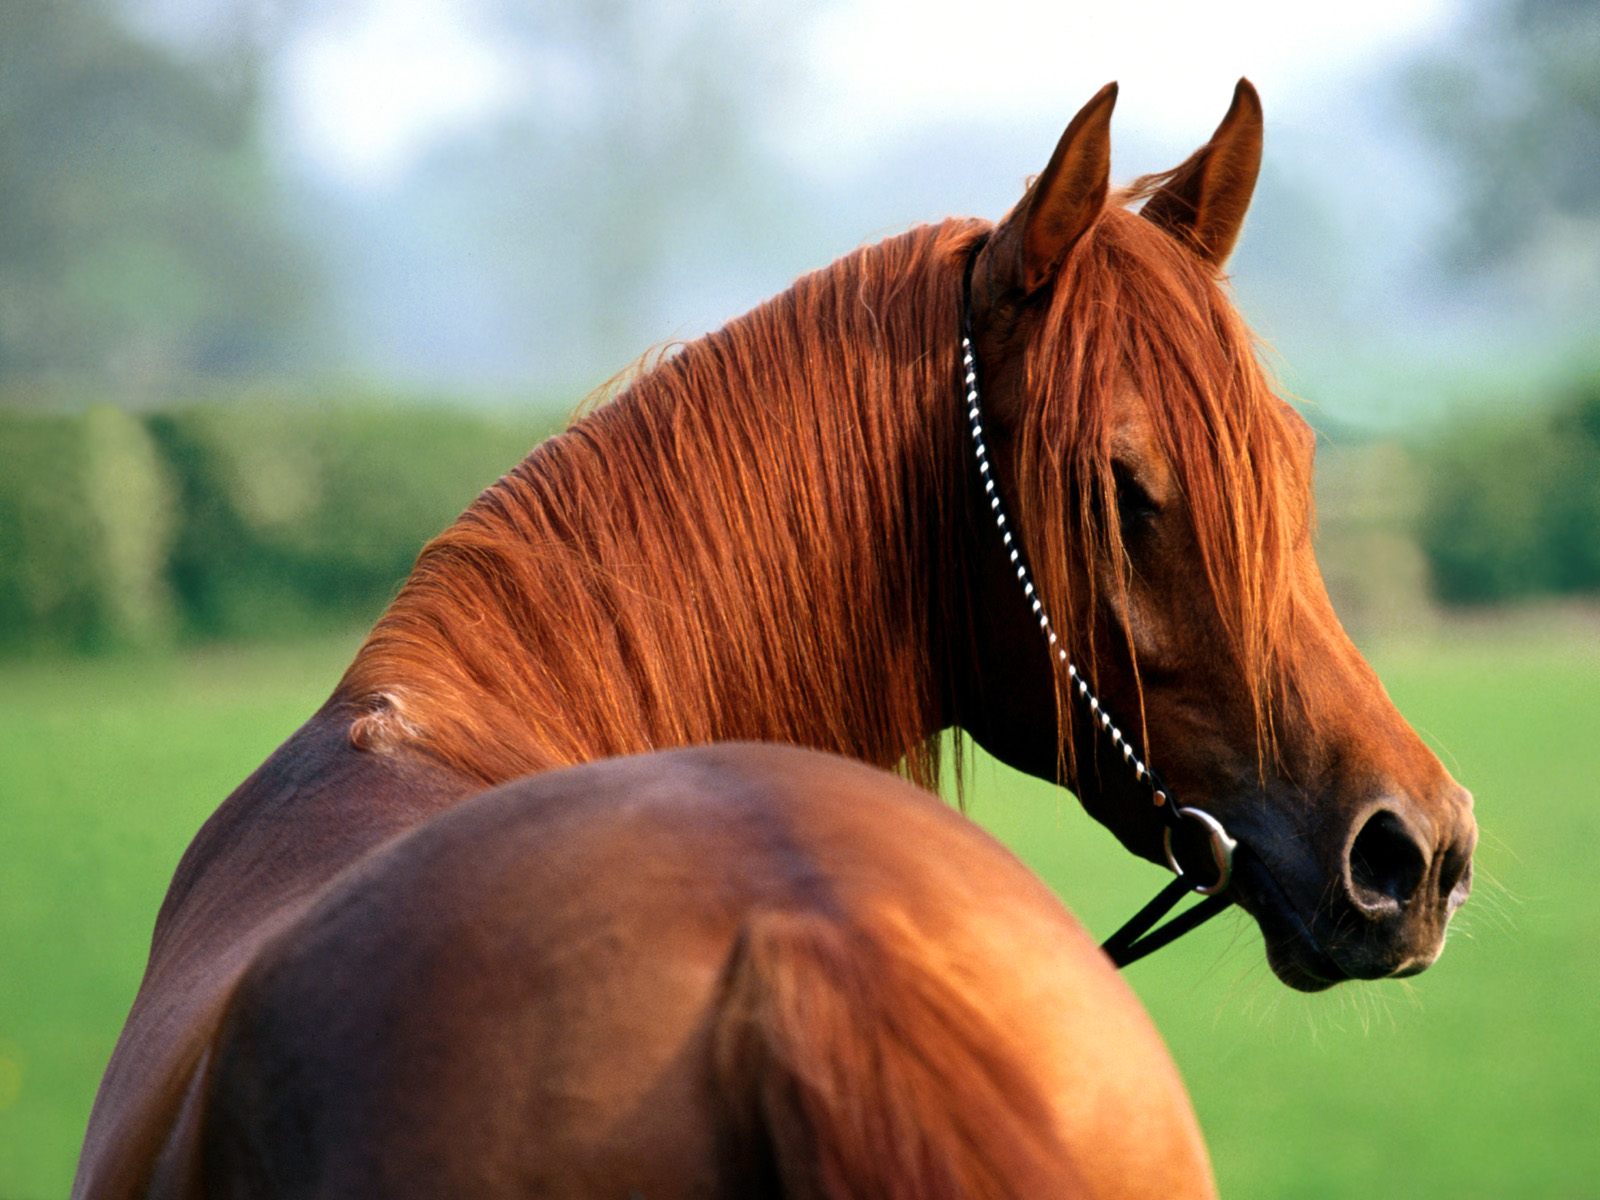 77+] Beautiful Horse Wallpapers on